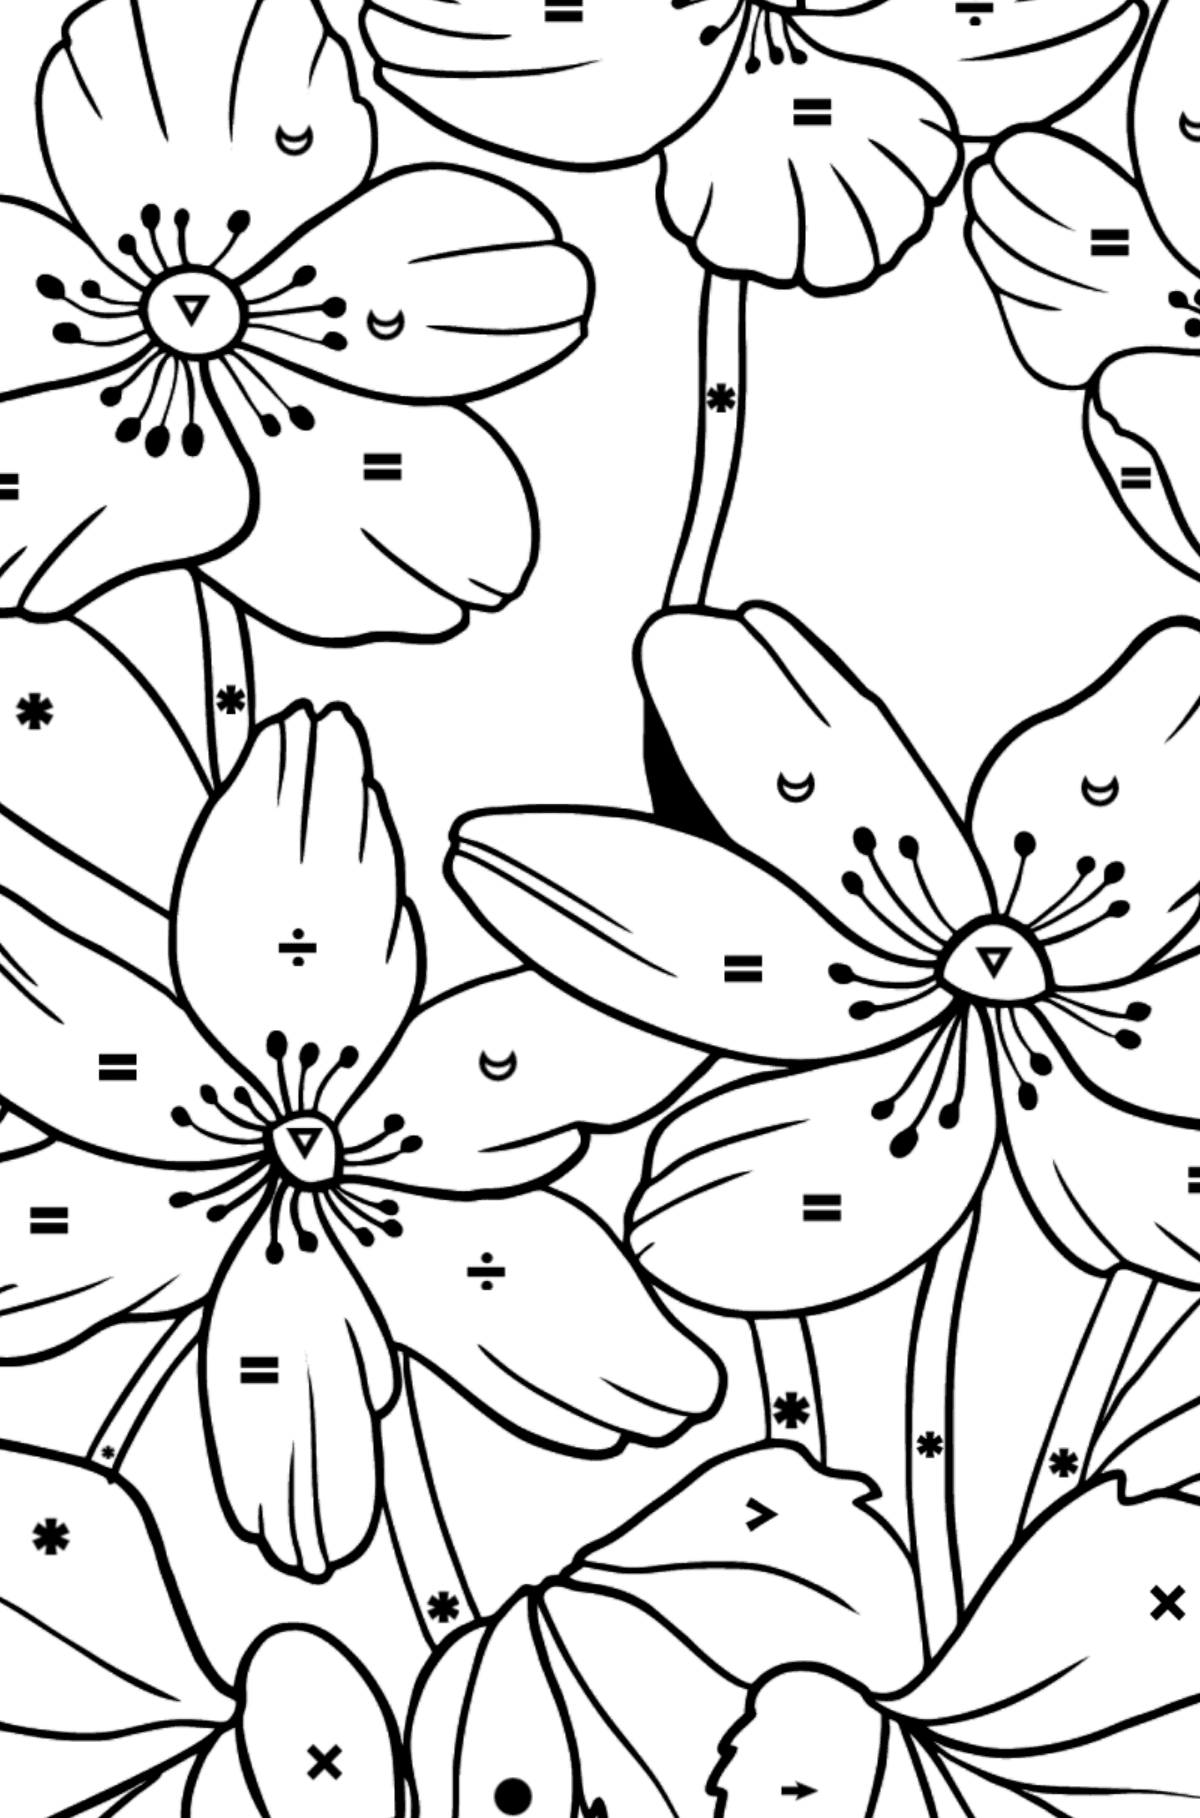 Flower Coloring Page - A Windflower with Yellow Petals - Coloring by Symbols for Kids